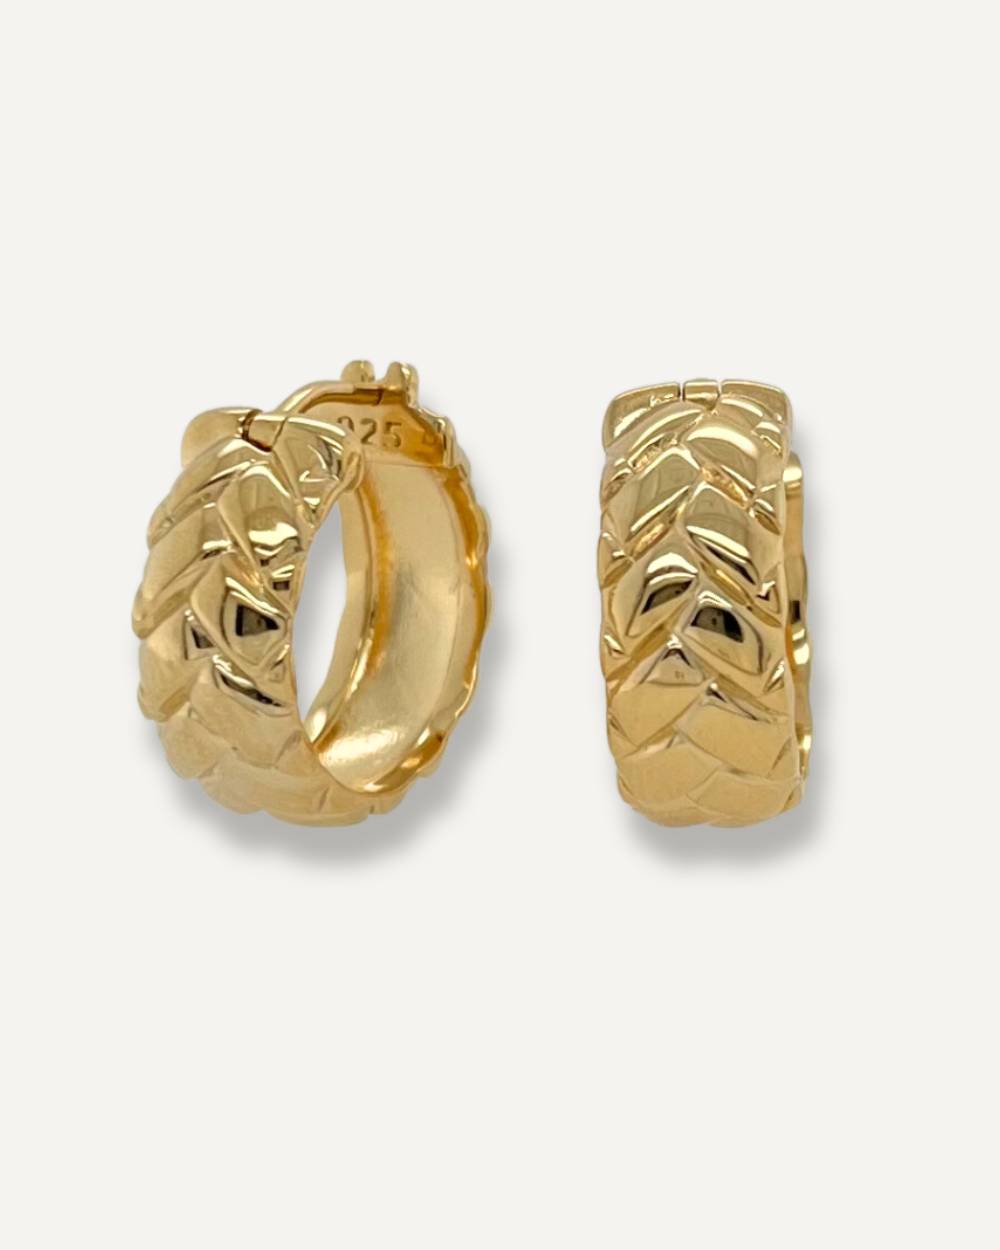 Chunky hoop earrings with surface design of tyre track in gold on cream background.